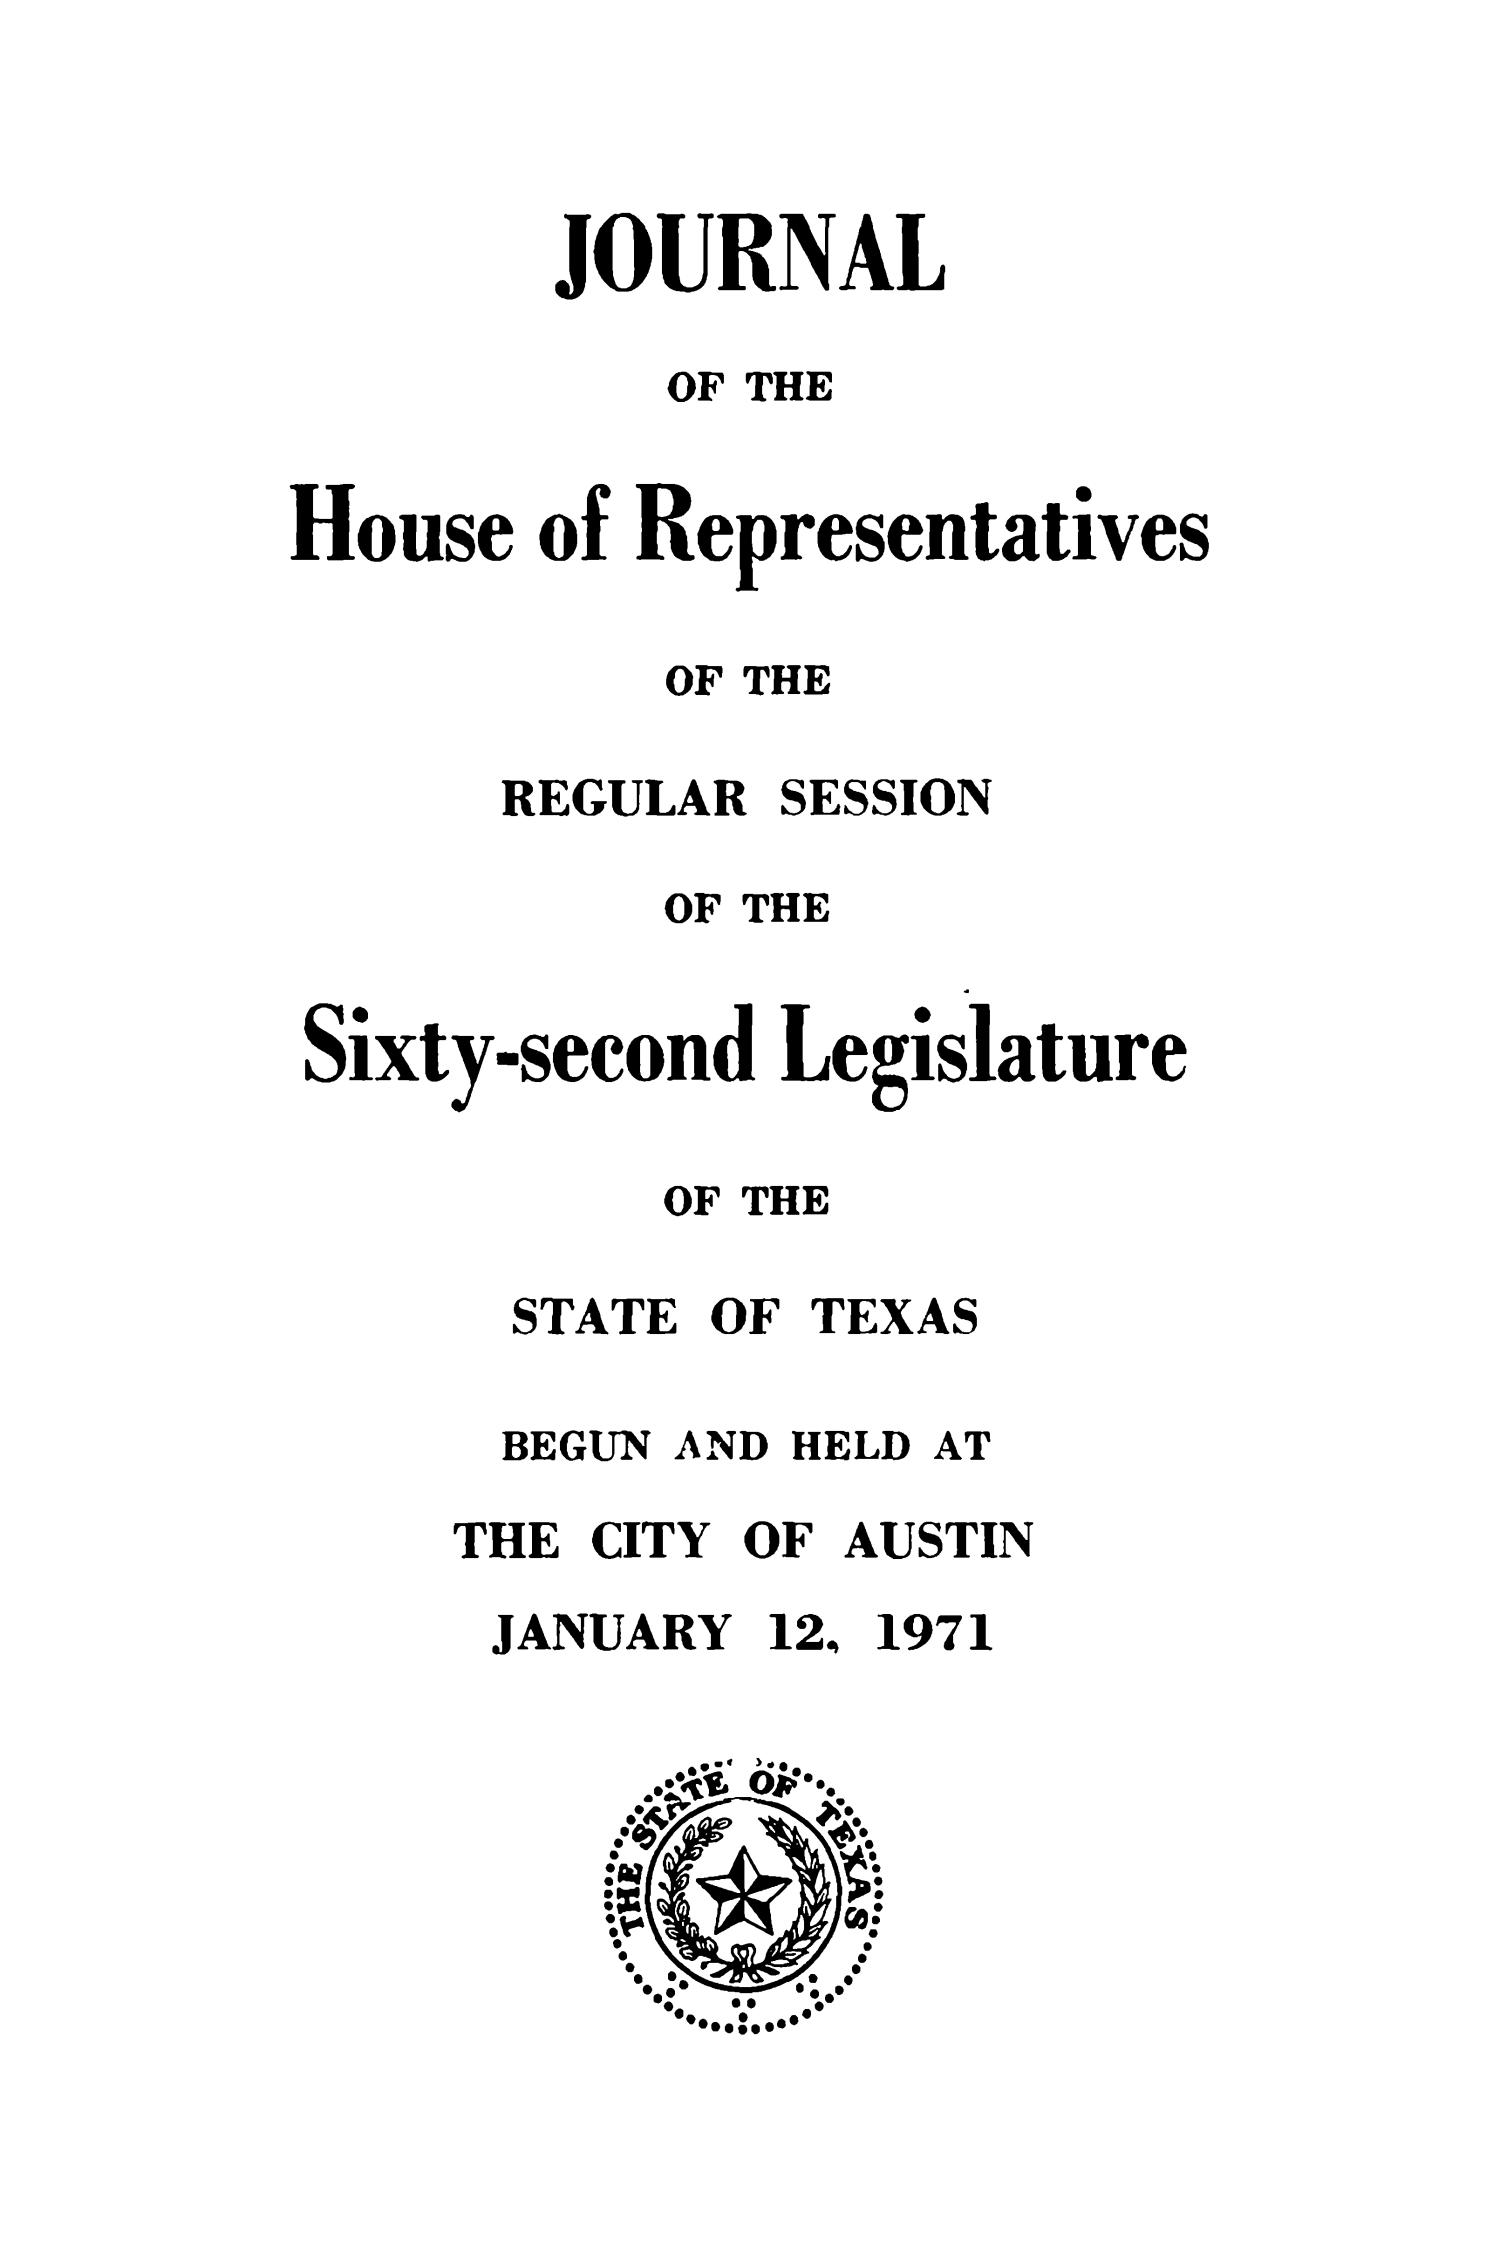 Journal of the House of Representatives of the Regular Session of the Sixty-Second Legislature of the State of Texas, Volume 1
                                                
                                                    Title Page
                                                